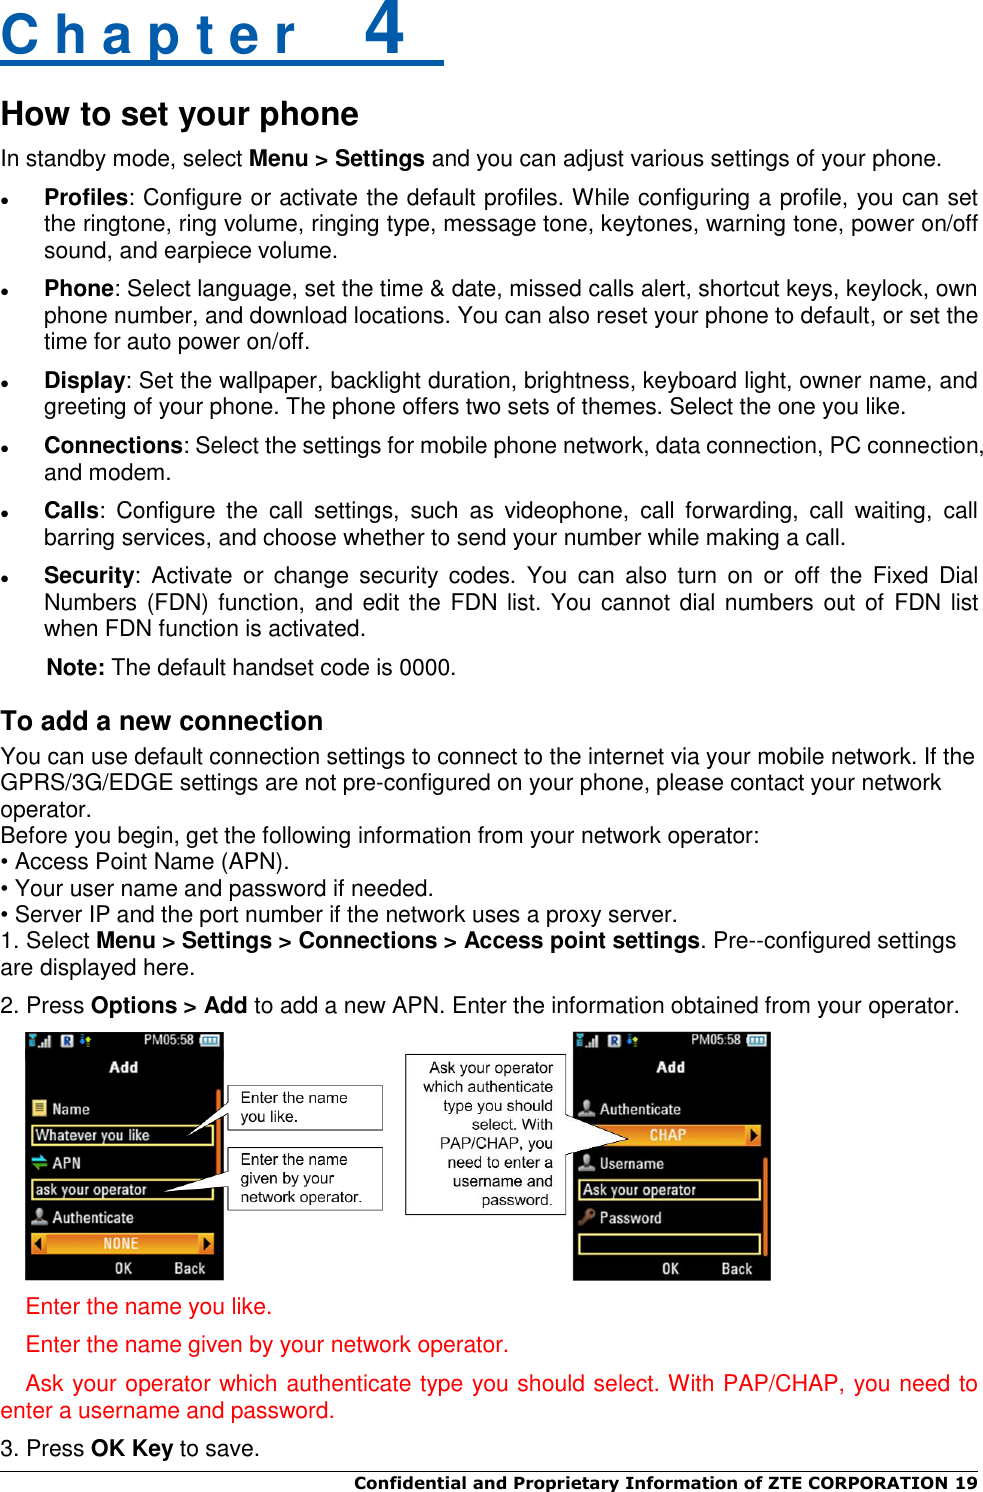  Confidential and Proprietary Information of ZTE CORPORATION 19   C h a p t e r    4   How to set your phone In standby mode, select Menu &gt; Settings and you can adjust various settings of your phone.  Profiles: Configure or activate the default profiles. While configuring a profile, you can set the ringtone, ring volume, ringing type, message tone, keytones, warning tone, power on/off sound, and earpiece volume.  Phone: Select language, set the time &amp; date, missed calls alert, shortcut keys, keylock, own phone number, and download locations. You can also reset your phone to default, or set the time for auto power on/off.  Display: Set the wallpaper, backlight duration, brightness, keyboard light, owner name, and greeting of your phone. The phone offers two sets of themes. Select the one you like.  Connections: Select the settings for mobile phone network, data connection, PC connection, and modem.  Calls:  Configure  the  call  settings,  such  as  videophone,  call  forwarding,  call  waiting,  call barring services, and choose whether to send your number while making a call.  Security:  Activate  or  change  security  codes.  You  can  also  turn  on  or  off  the  Fixed  Dial Numbers (FDN) function, and edit the FDN list. You  cannot dial numbers out of  FDN list when FDN function is activated. Note: The default handset code is 0000. To add a new connection You can use default connection settings to connect to the internet via your mobile network. If the GPRS/3G/EDGE settings are not pre-configured on your phone, please contact your network operator.   Before you begin, get the following information from your network operator: • Access Point Name (APN). • Your user name and password if needed. • Server IP and the port number if the network uses a proxy server. 1. Select Menu &gt; Settings &gt; Connections &gt; Access point settings. Pre--configured settings are displayed here.   2. Press Options &gt; Add to add a new APN. Enter the information obtained from your operator.     Enter the name you like. Enter the name given by your network operator. Ask your operator which authenticate type you should select. With PAP/CHAP, you need to enter a username and password. 3. Press OK Key to save. 